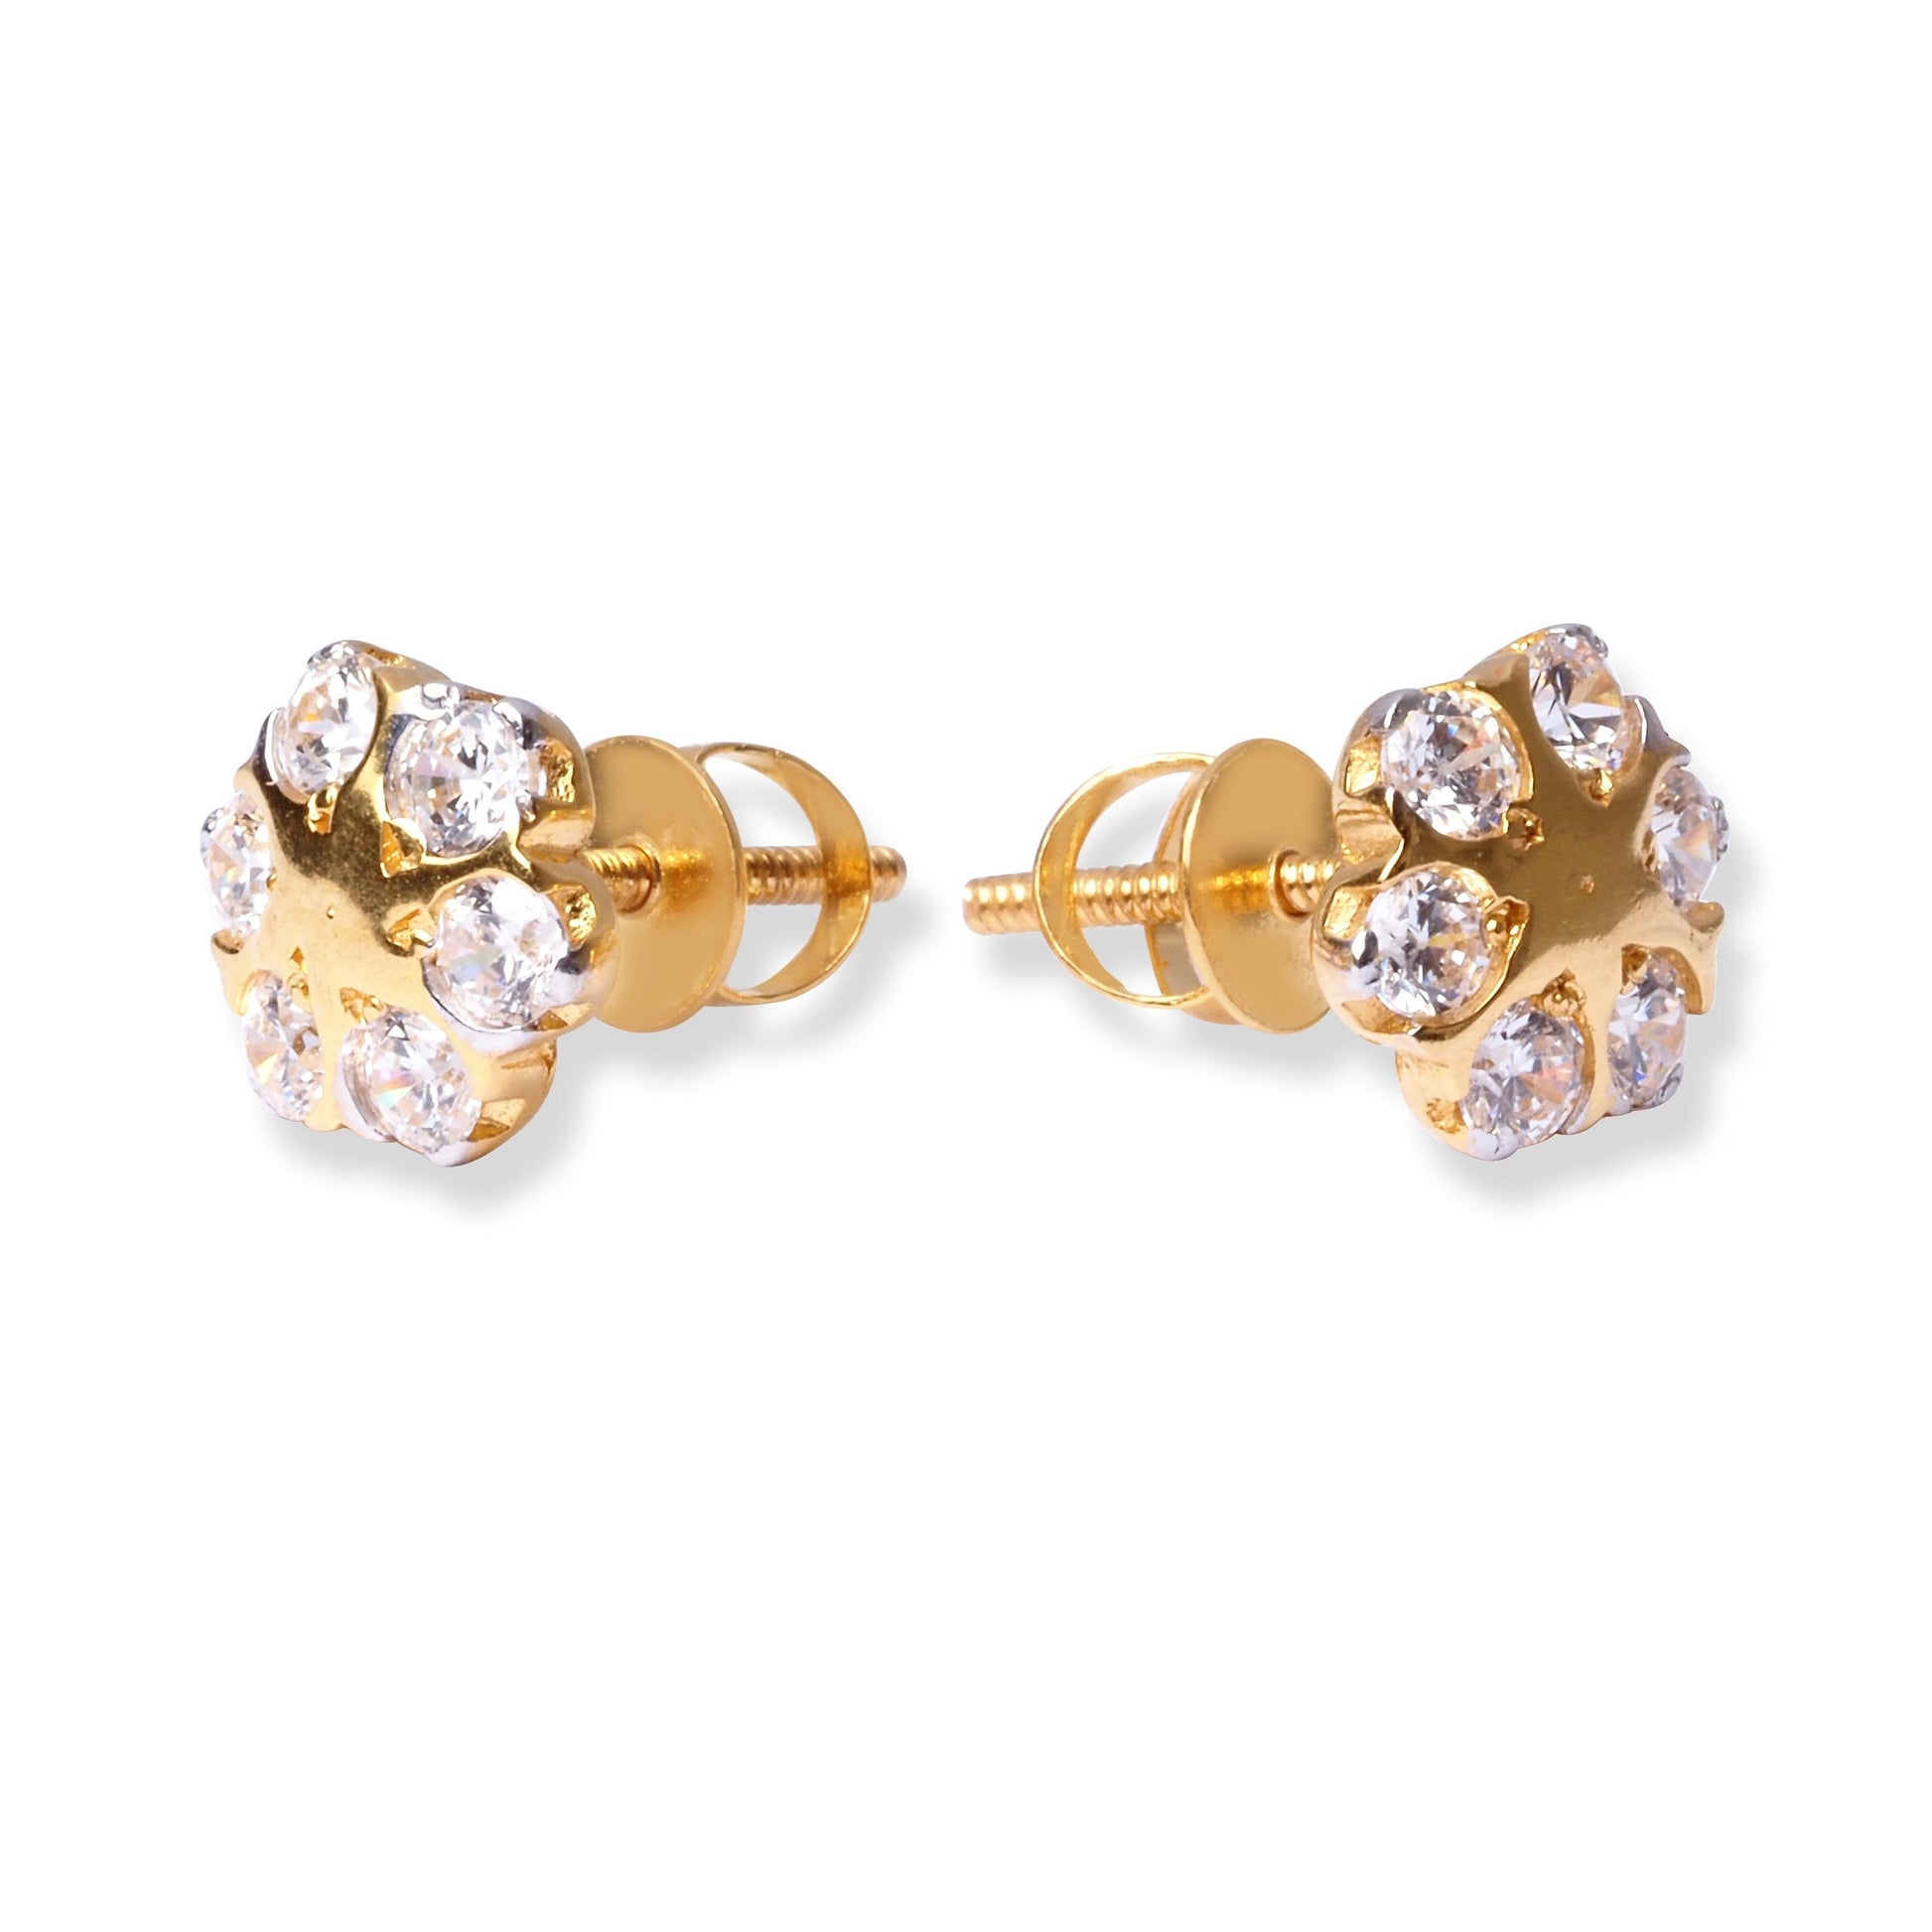 22ct Gold Flower Stud Earrings with Cubic Zirconia Stones E-7966 - Minar Jewellers